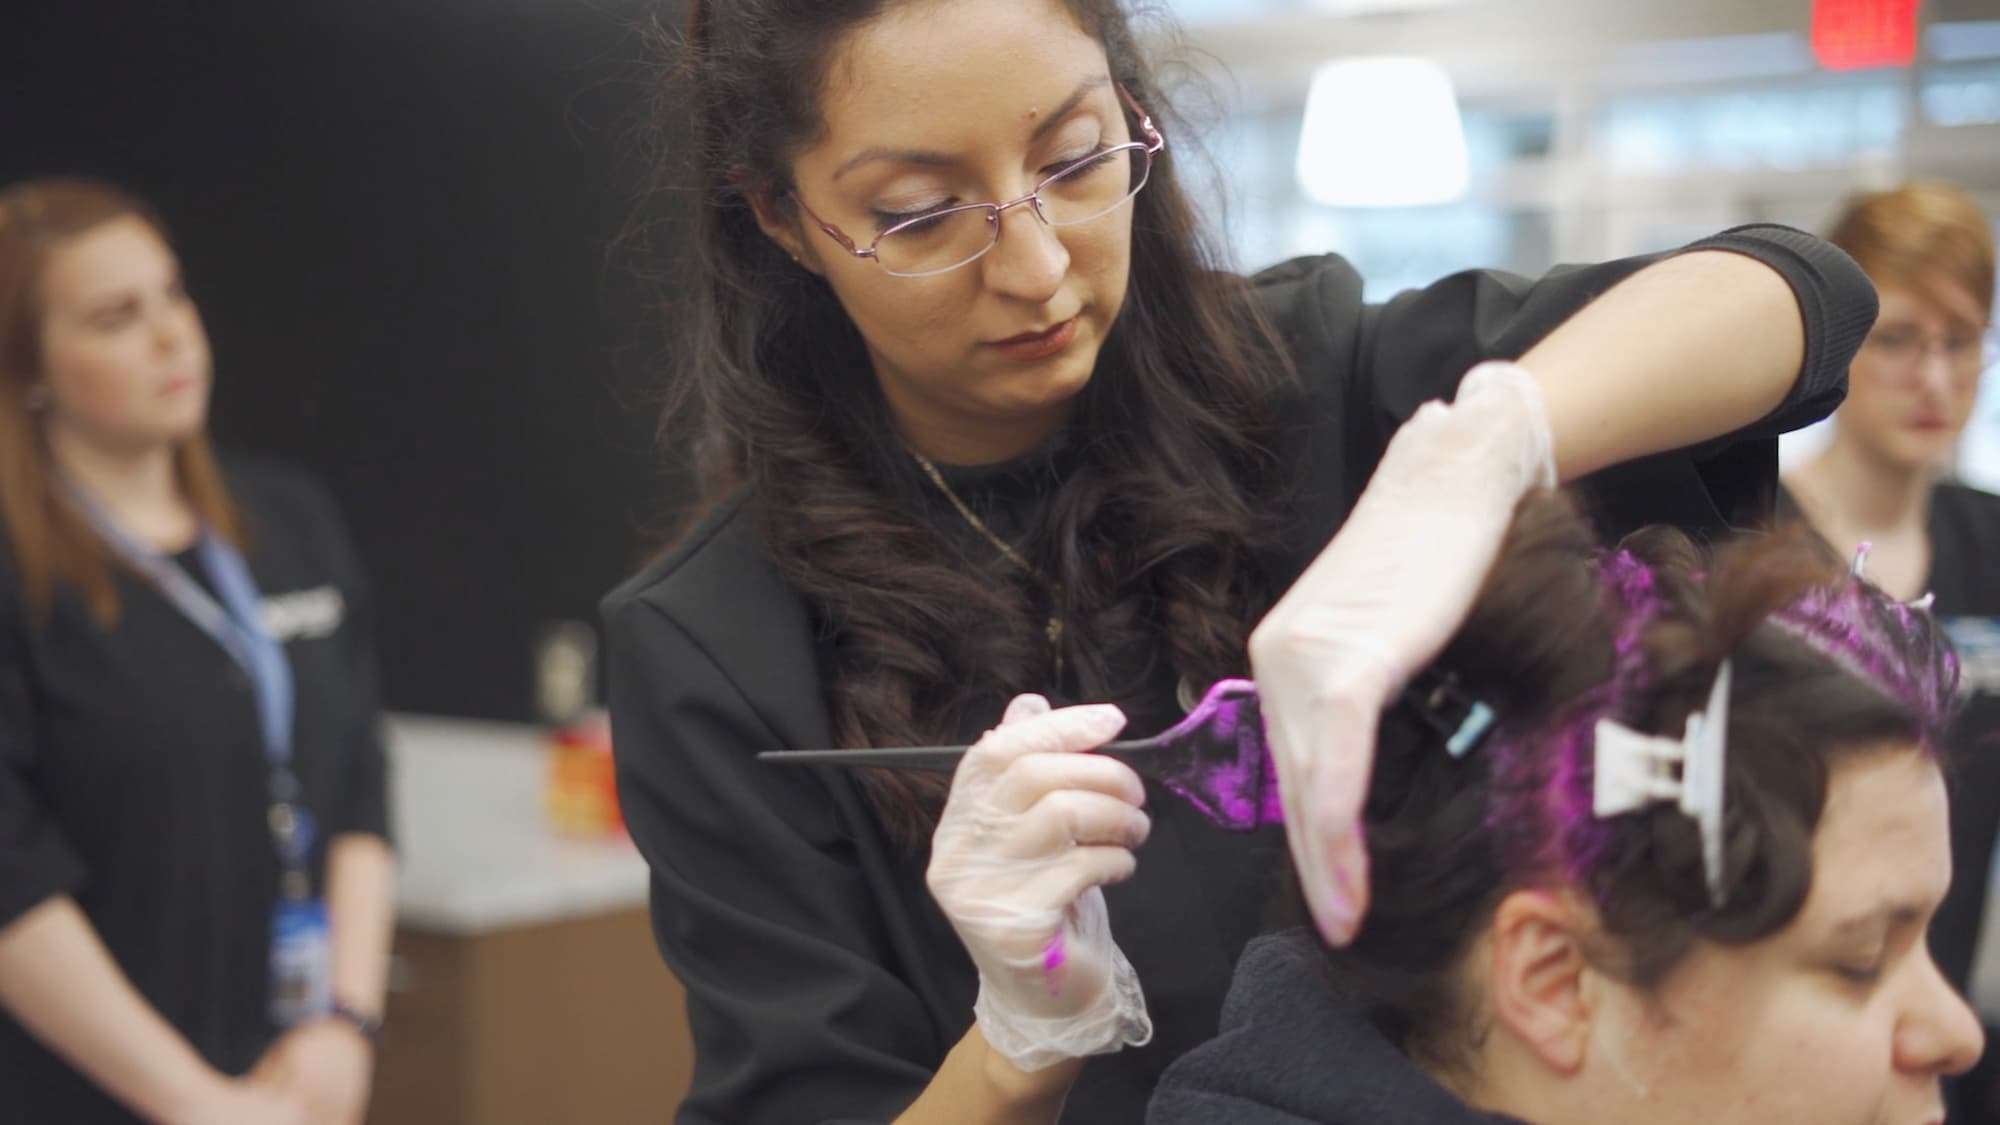 A hair stylist wears disposable gloves as she brushes purple hair dye into her client's hair.